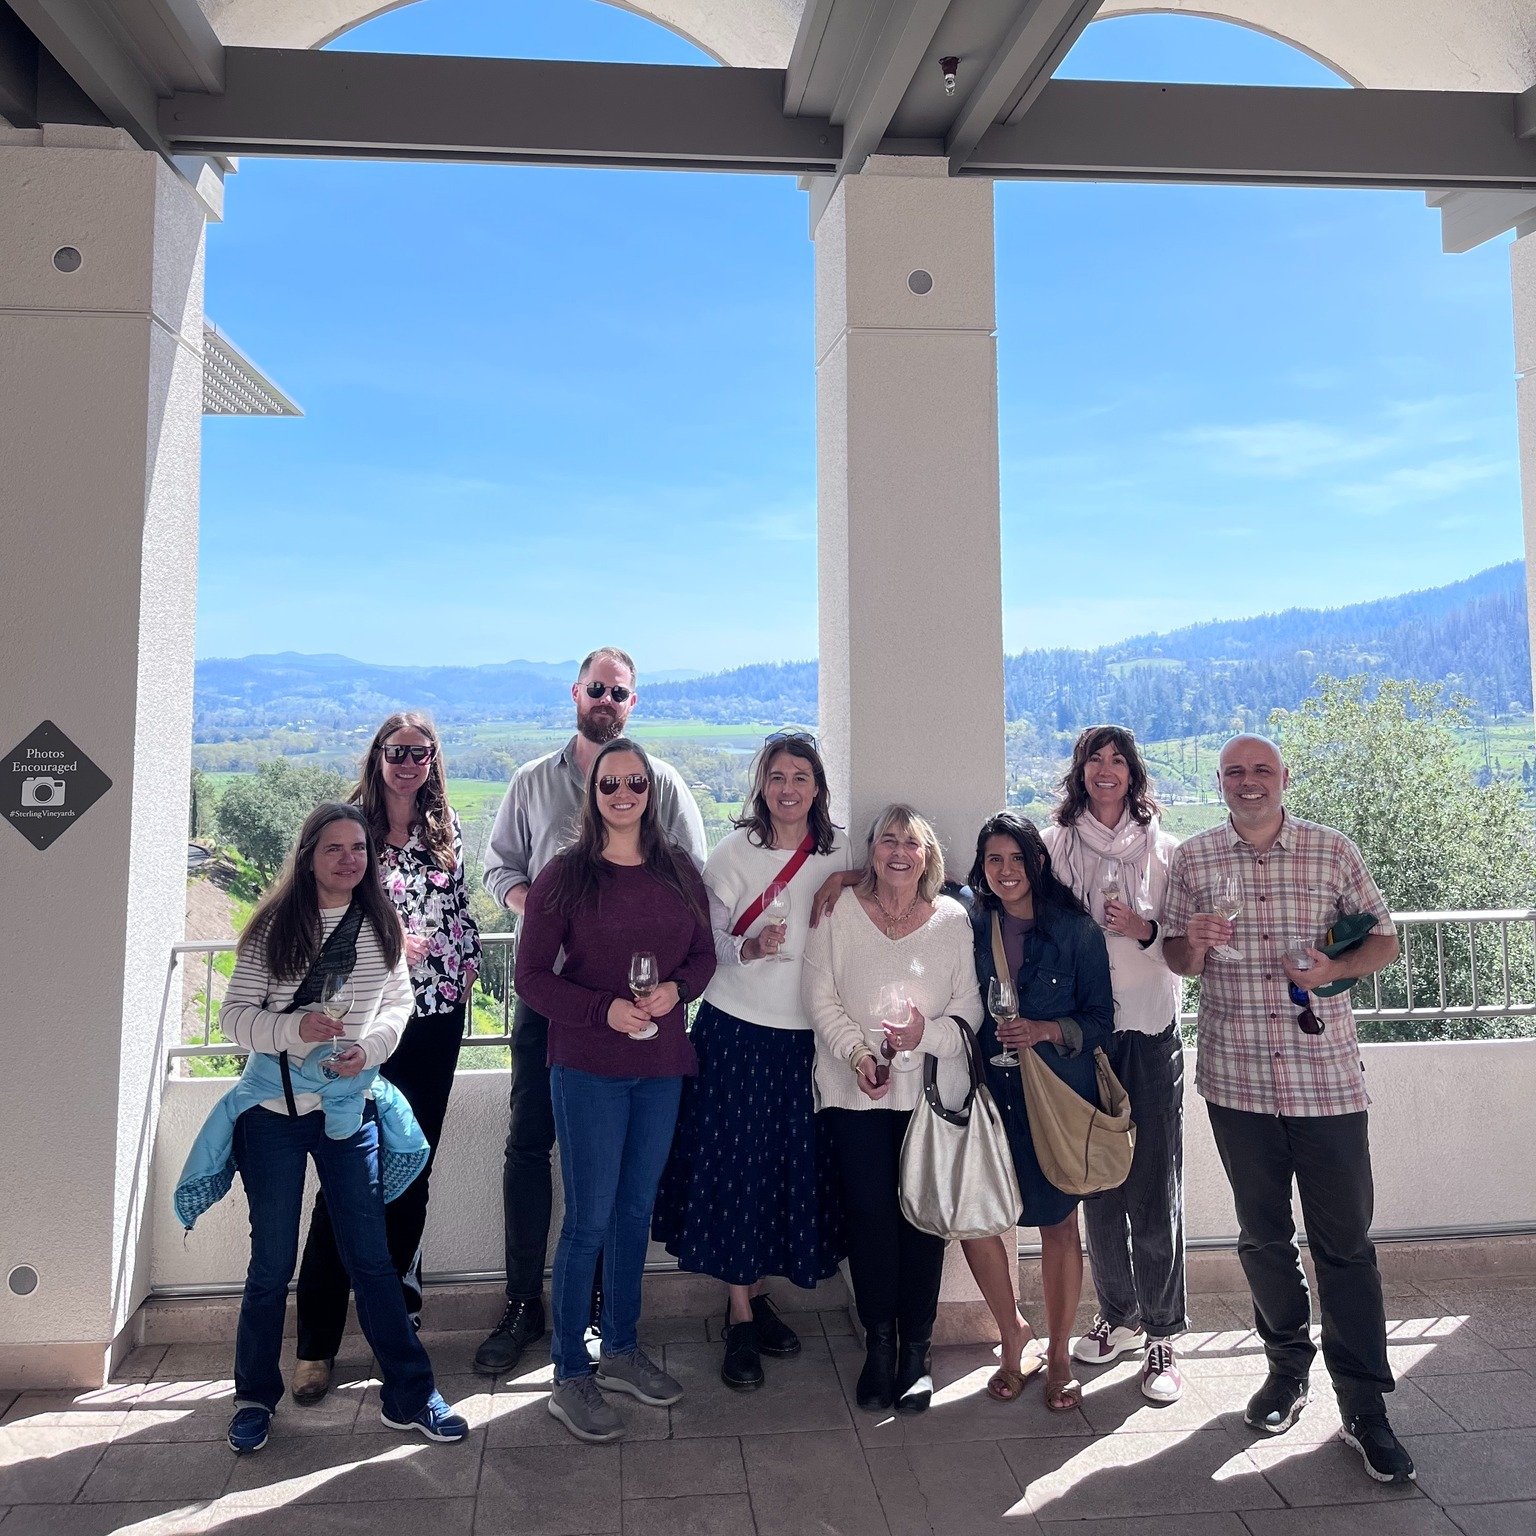 We made it up the hill to Sterling Vineyards and it was glorious. The tour starts at the base where the new gondola system whisks guests to the top. We admired the views - of both #napavalley and the newly designed spaces by #shawbackdesign The wine 